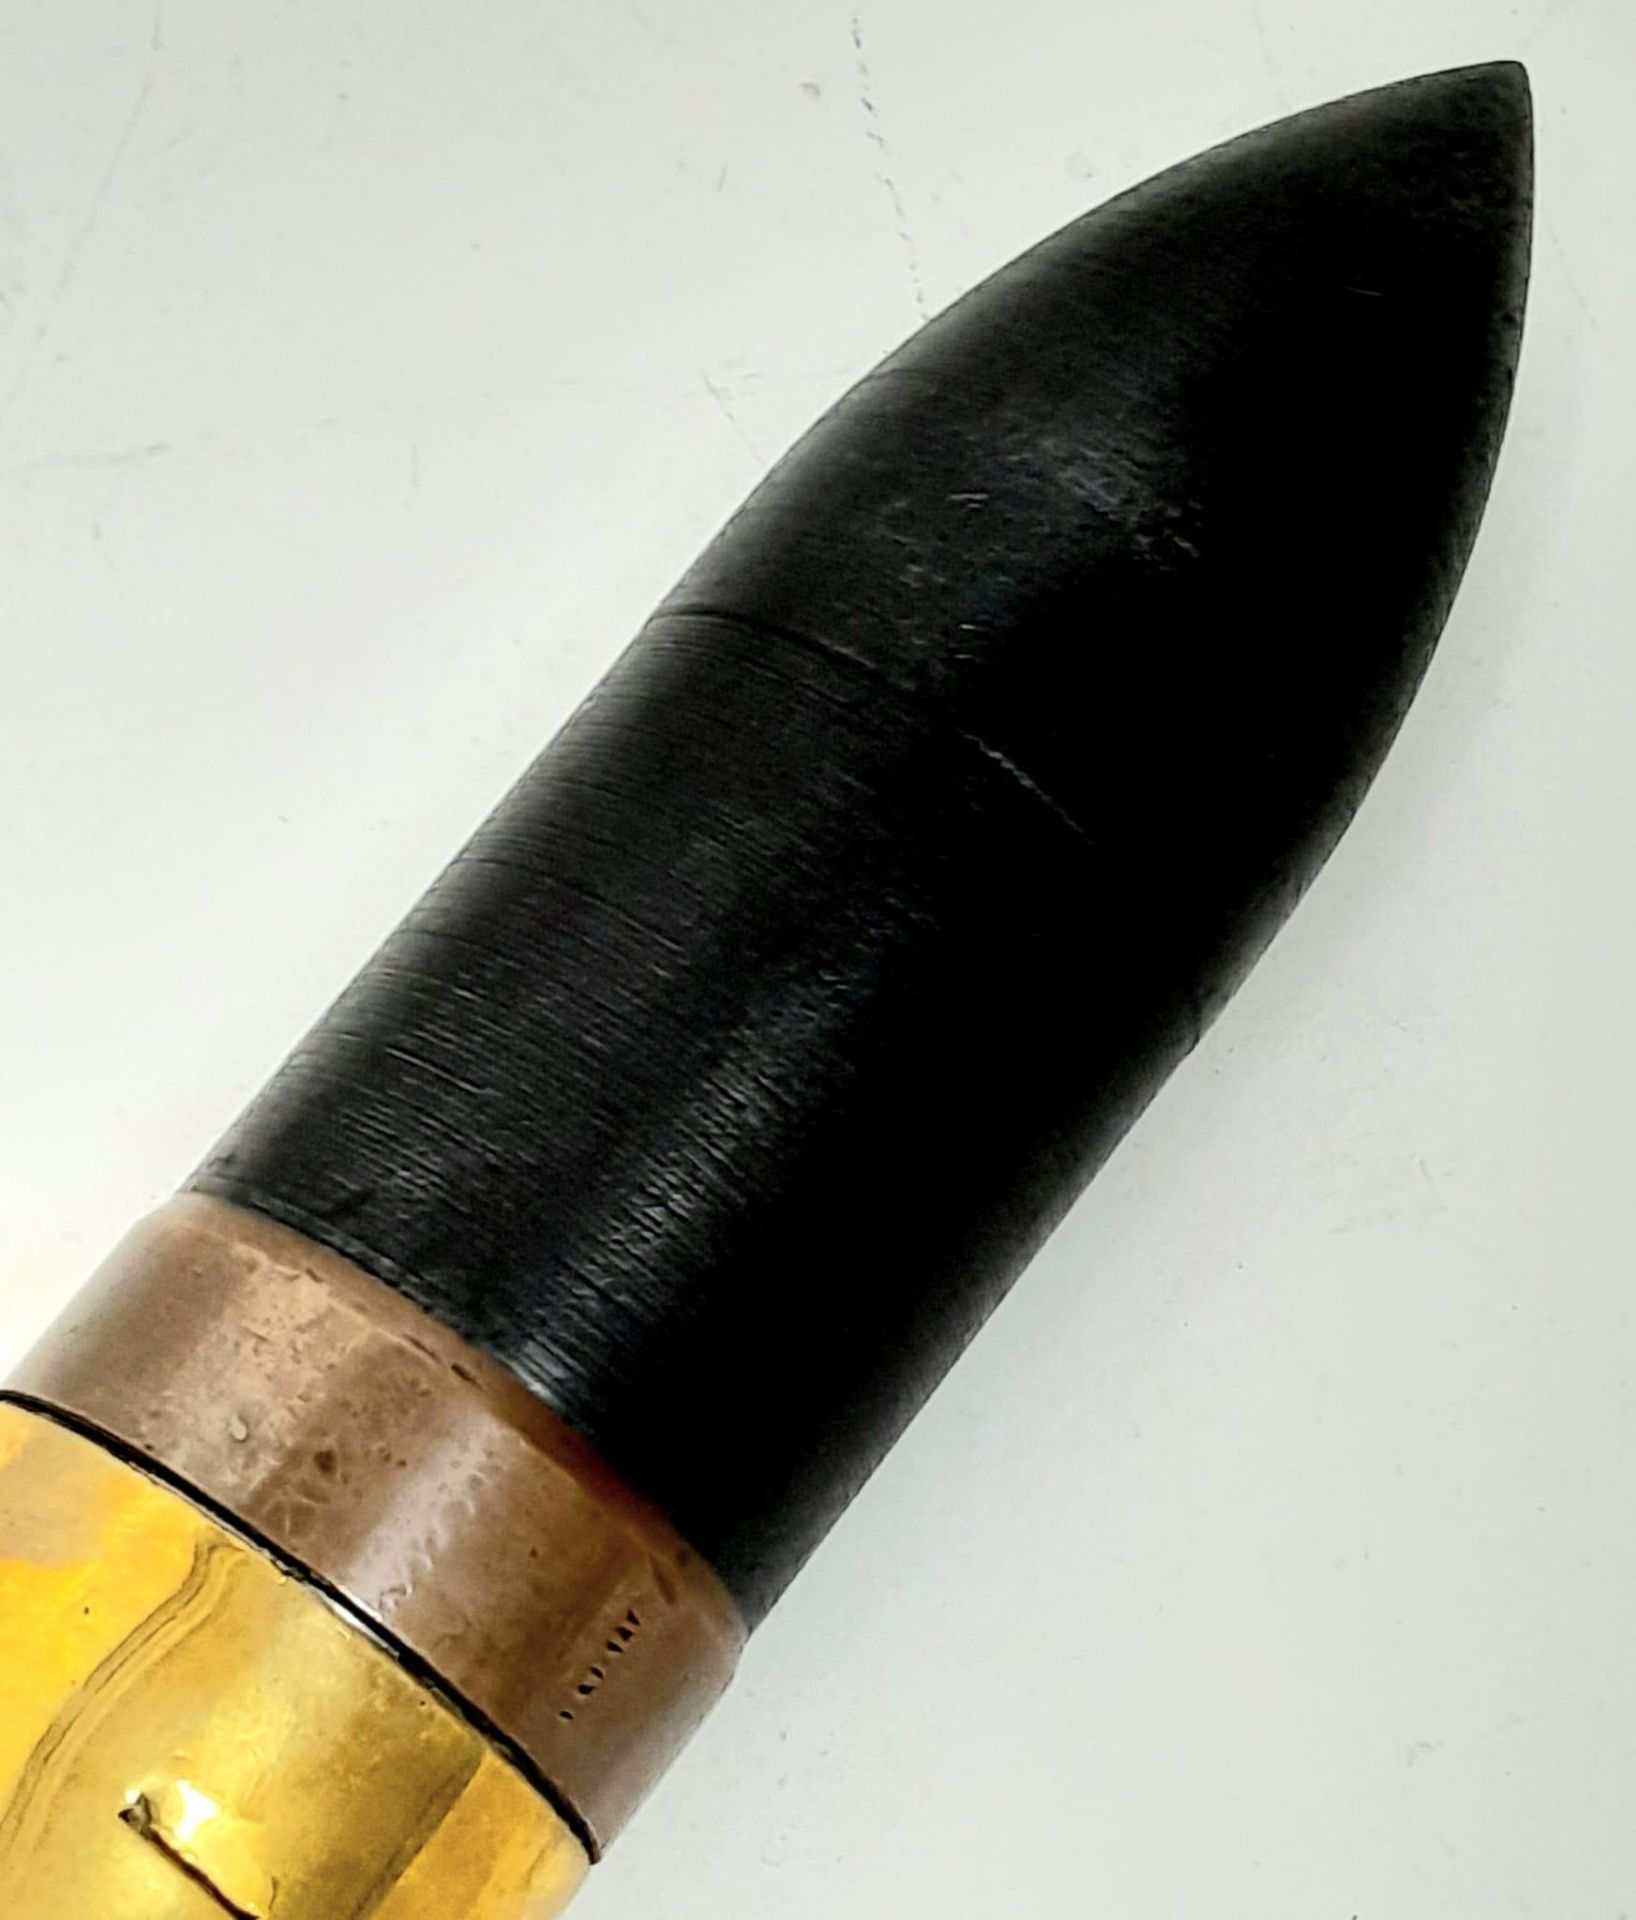 Am amazing condition British 6 Pdr Navel Shell used in British Male Tanks during WW1. The projectile - Image 3 of 4